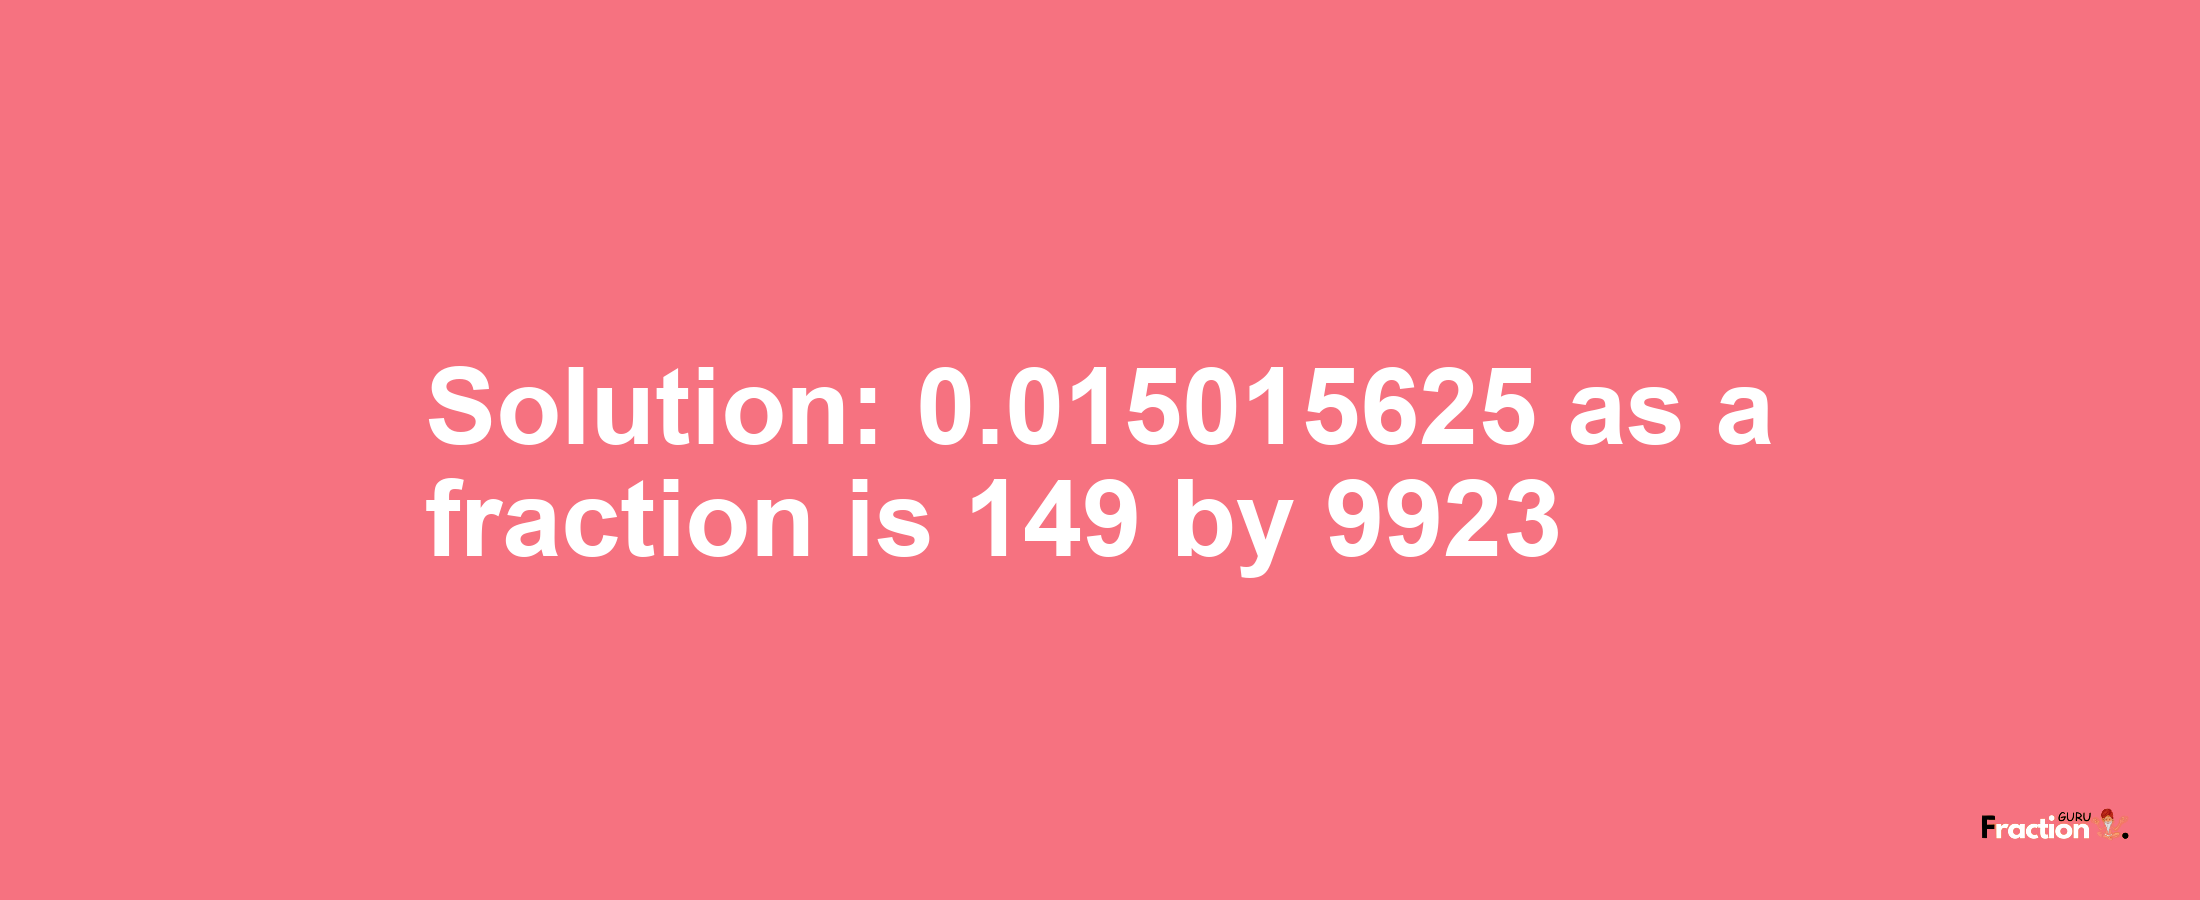 Solution:0.015015625 as a fraction is 149/9923